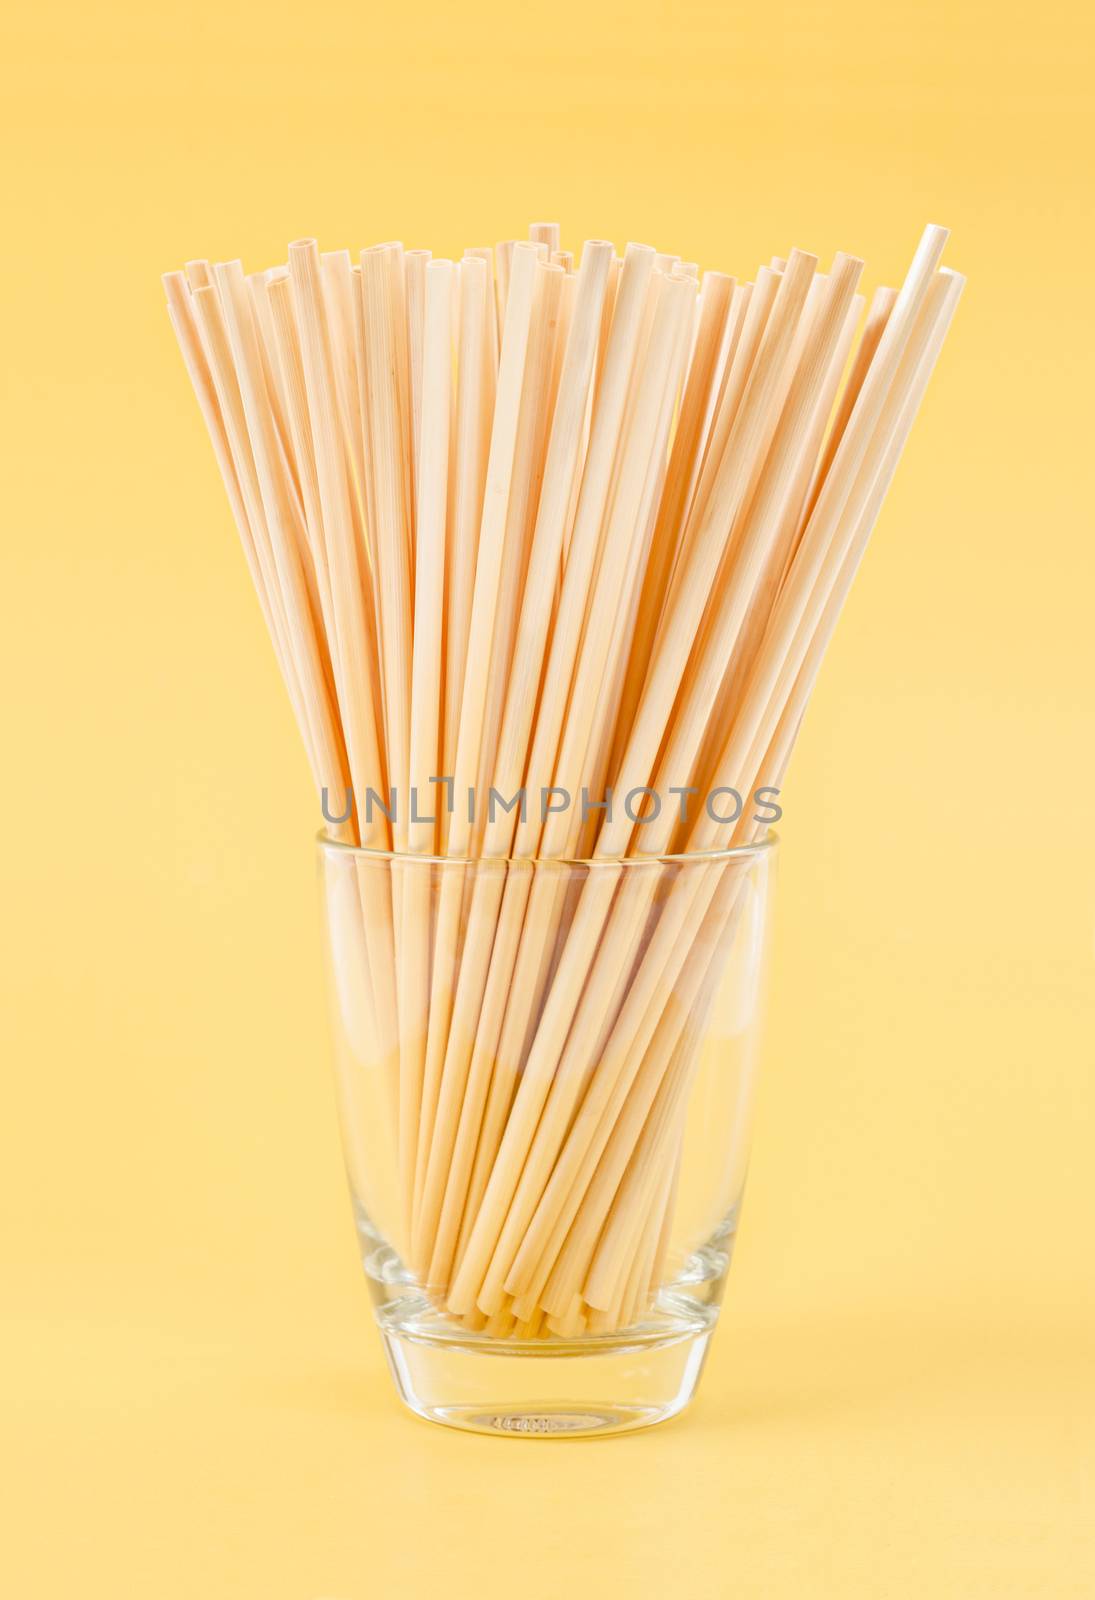 Wheat Straws for drinking water natural eco friendly renewable in glass on yellow background.